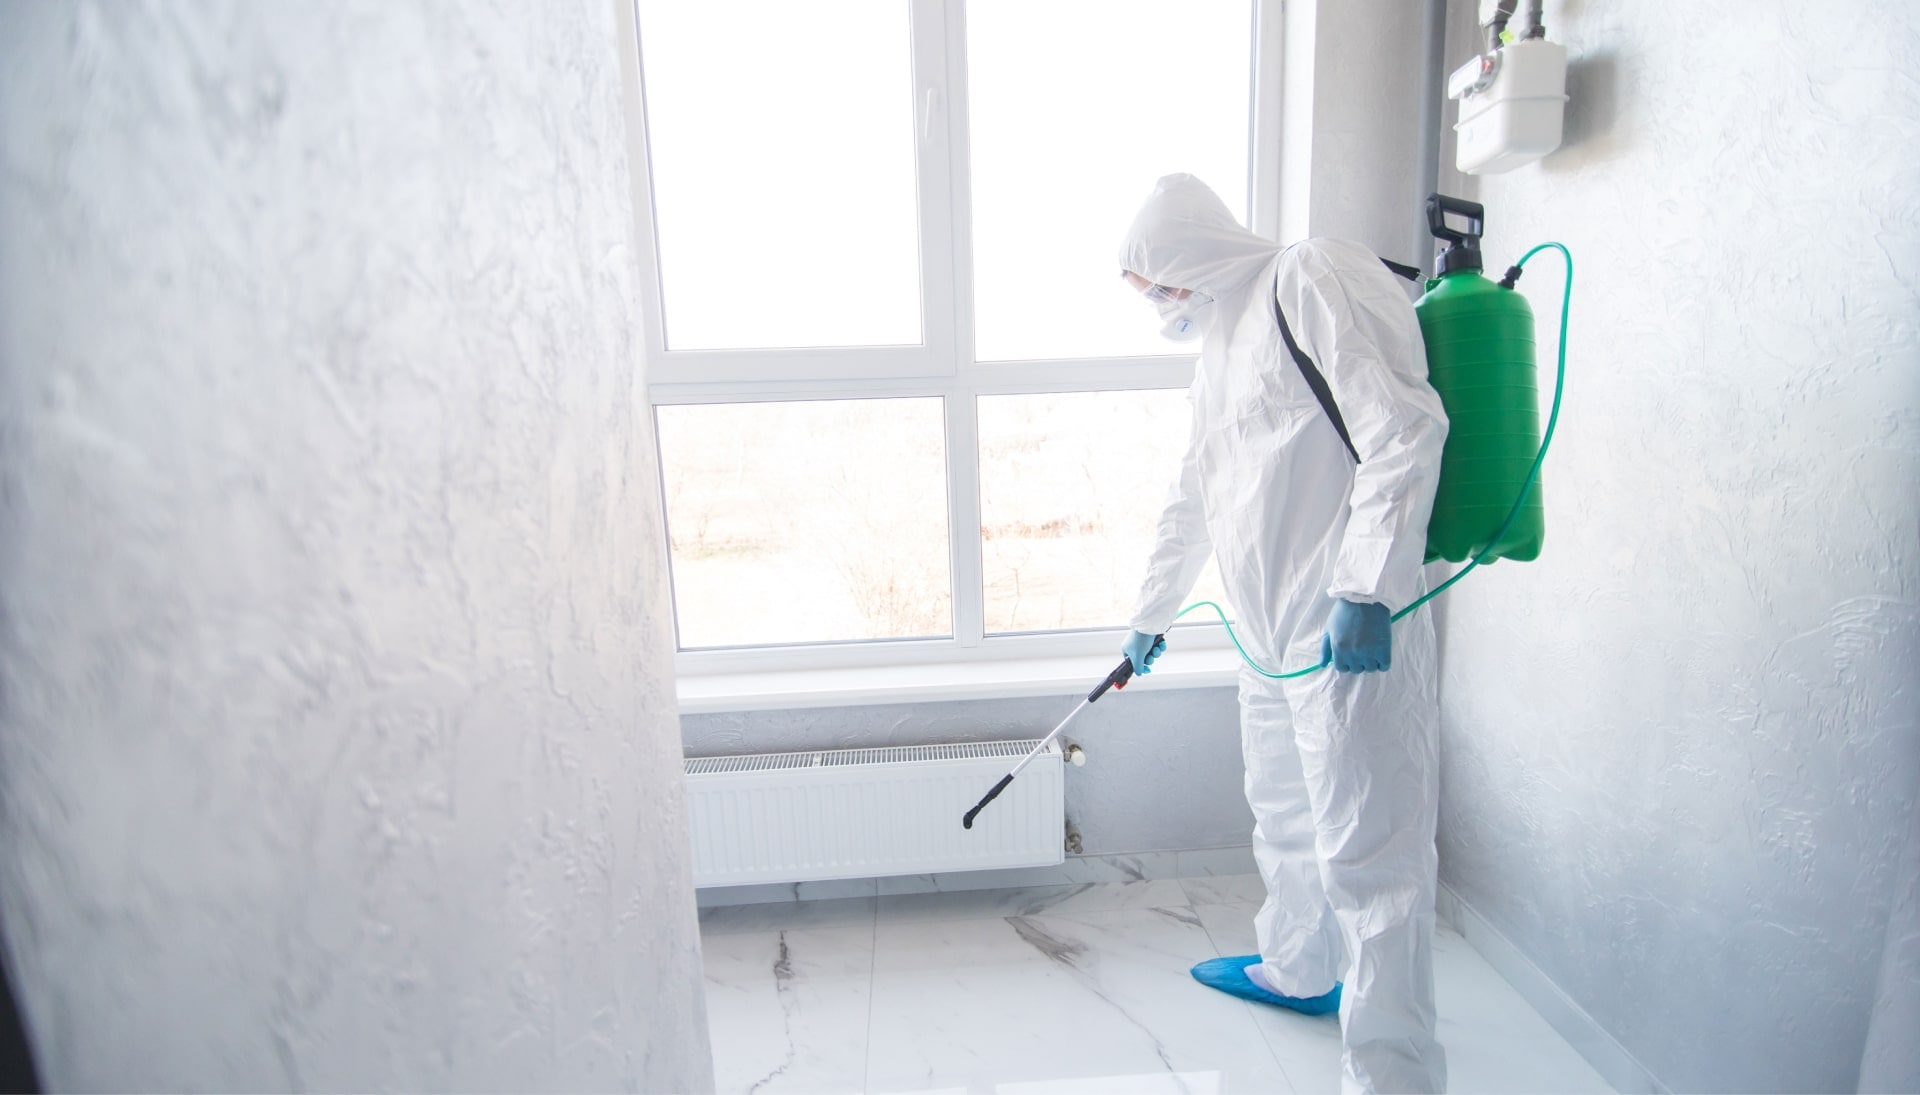 We provide the highest-quality mold inspection, testing, and removal services in the Aurora, Colorado area.